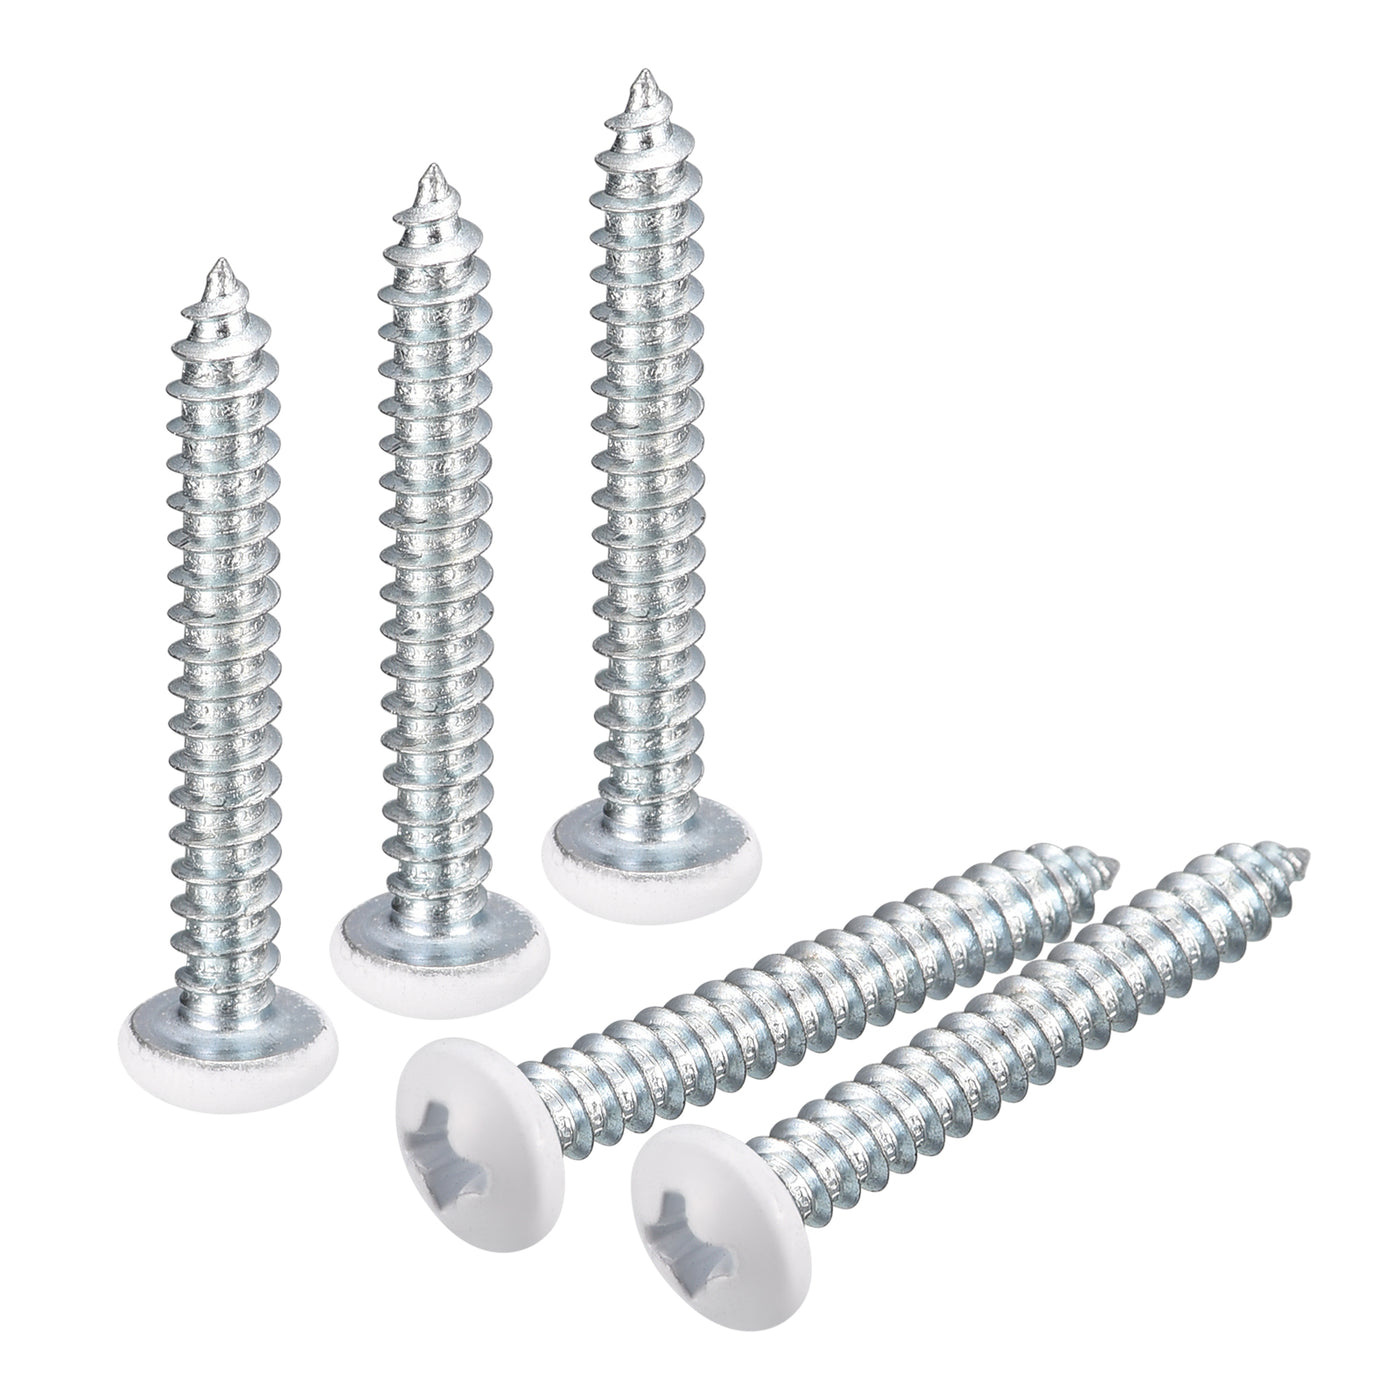 uxcell Uxcell ST4x30mm White Screws Self Tapping Screws, 50pcs Pan Head Phillips Screws